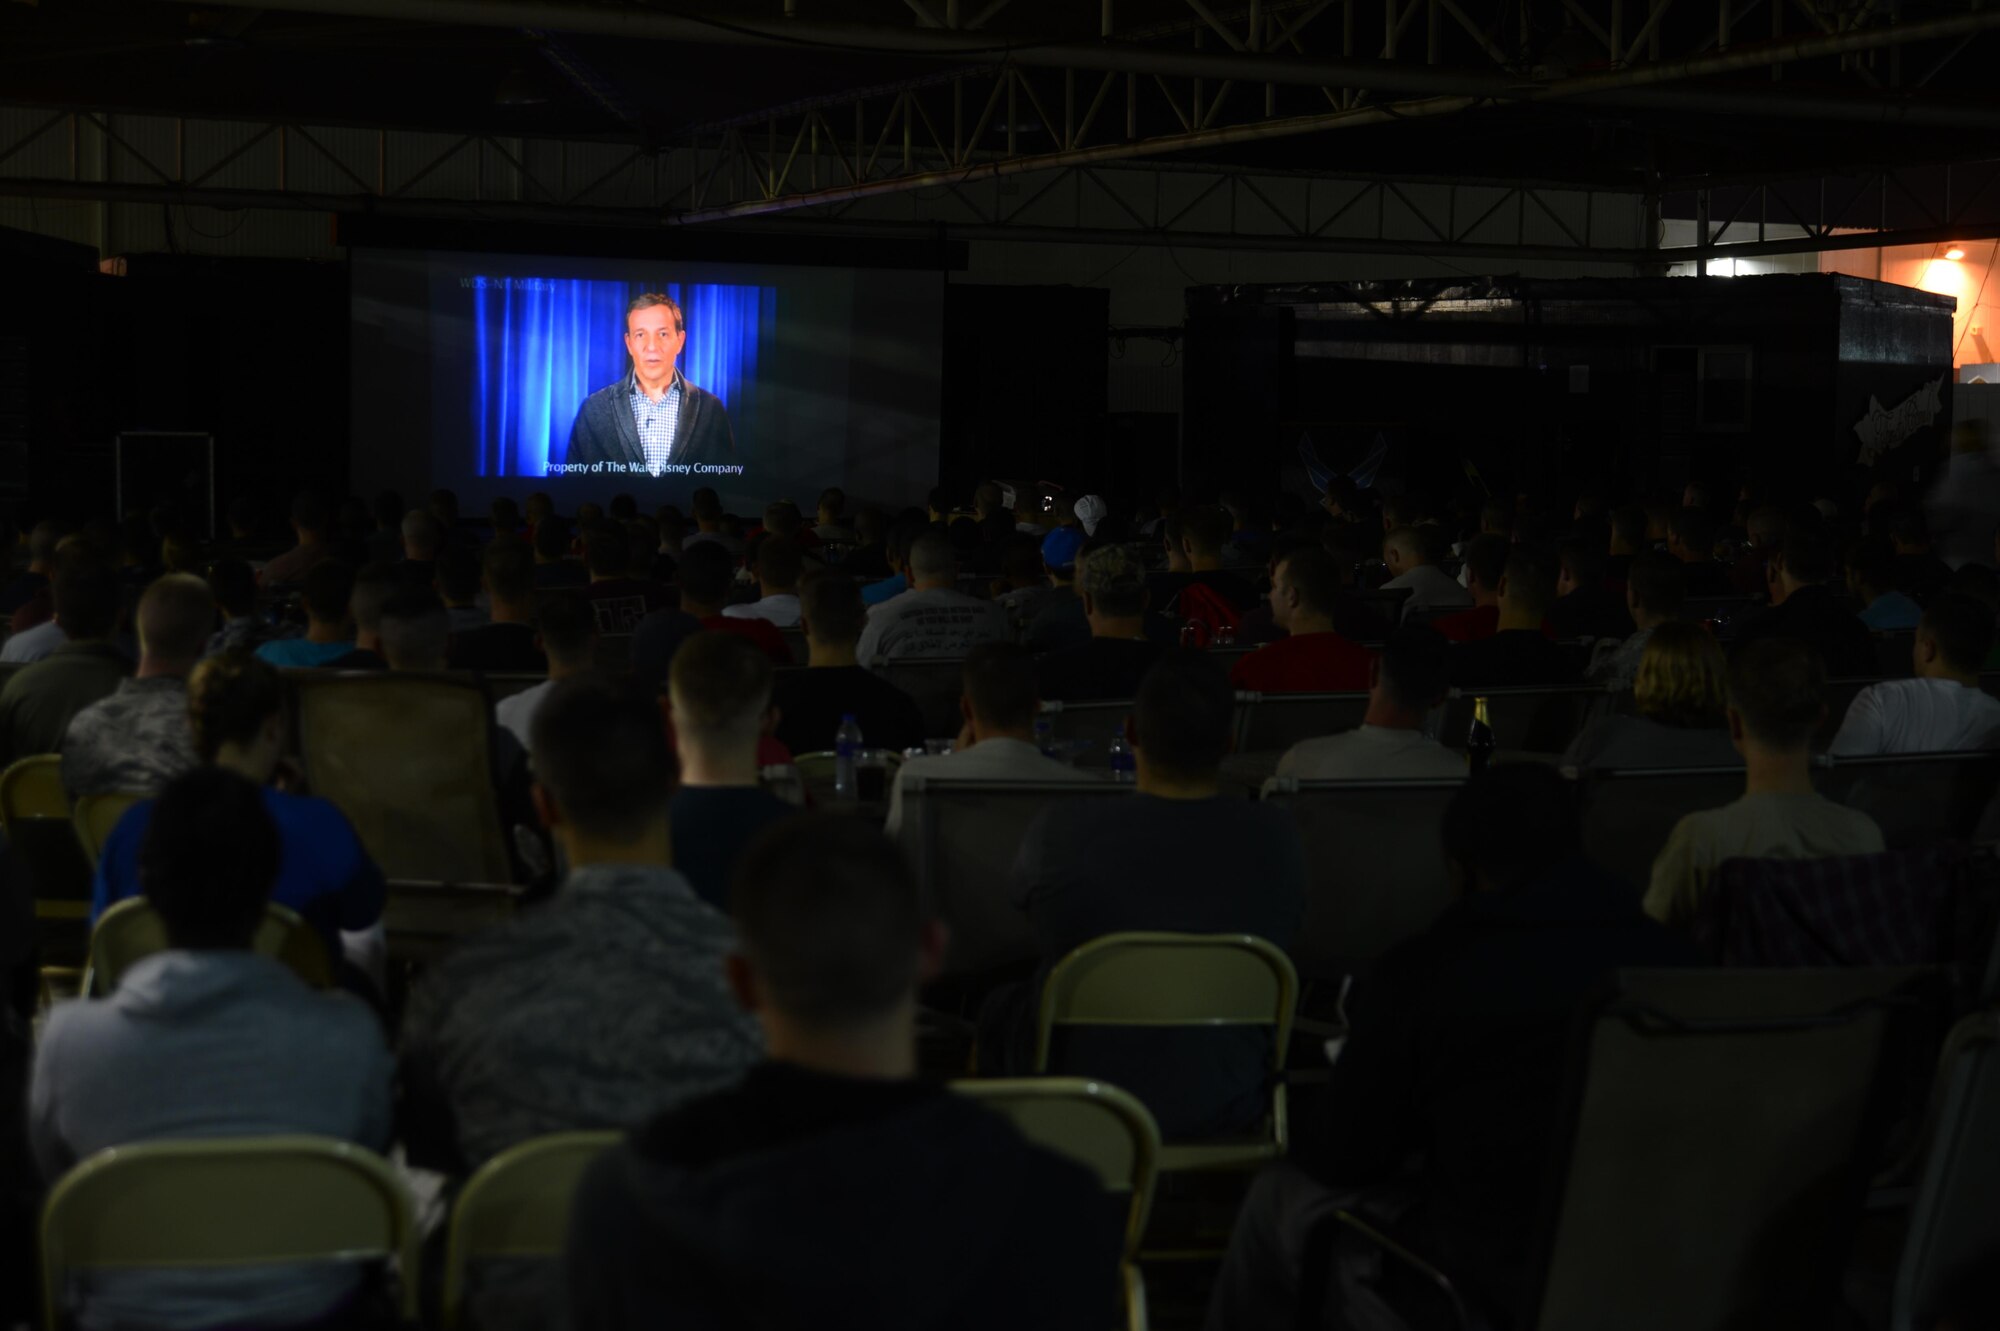 Robert Iger, Chairman and Chief Executive Officer of the Walt Disney Company personally thanks U.S. service members and coalition partners for their service away during a prerecorded message at an undisclosed location in Southwest Asia, Dec. 21, 2015. Iger’s message was viewed by more than 1,400 service members during two screenings of Star Wars: The Force Awakens held on base. (U. S. Air Force photo by Tech. Sgt. Frank Miller/Released)